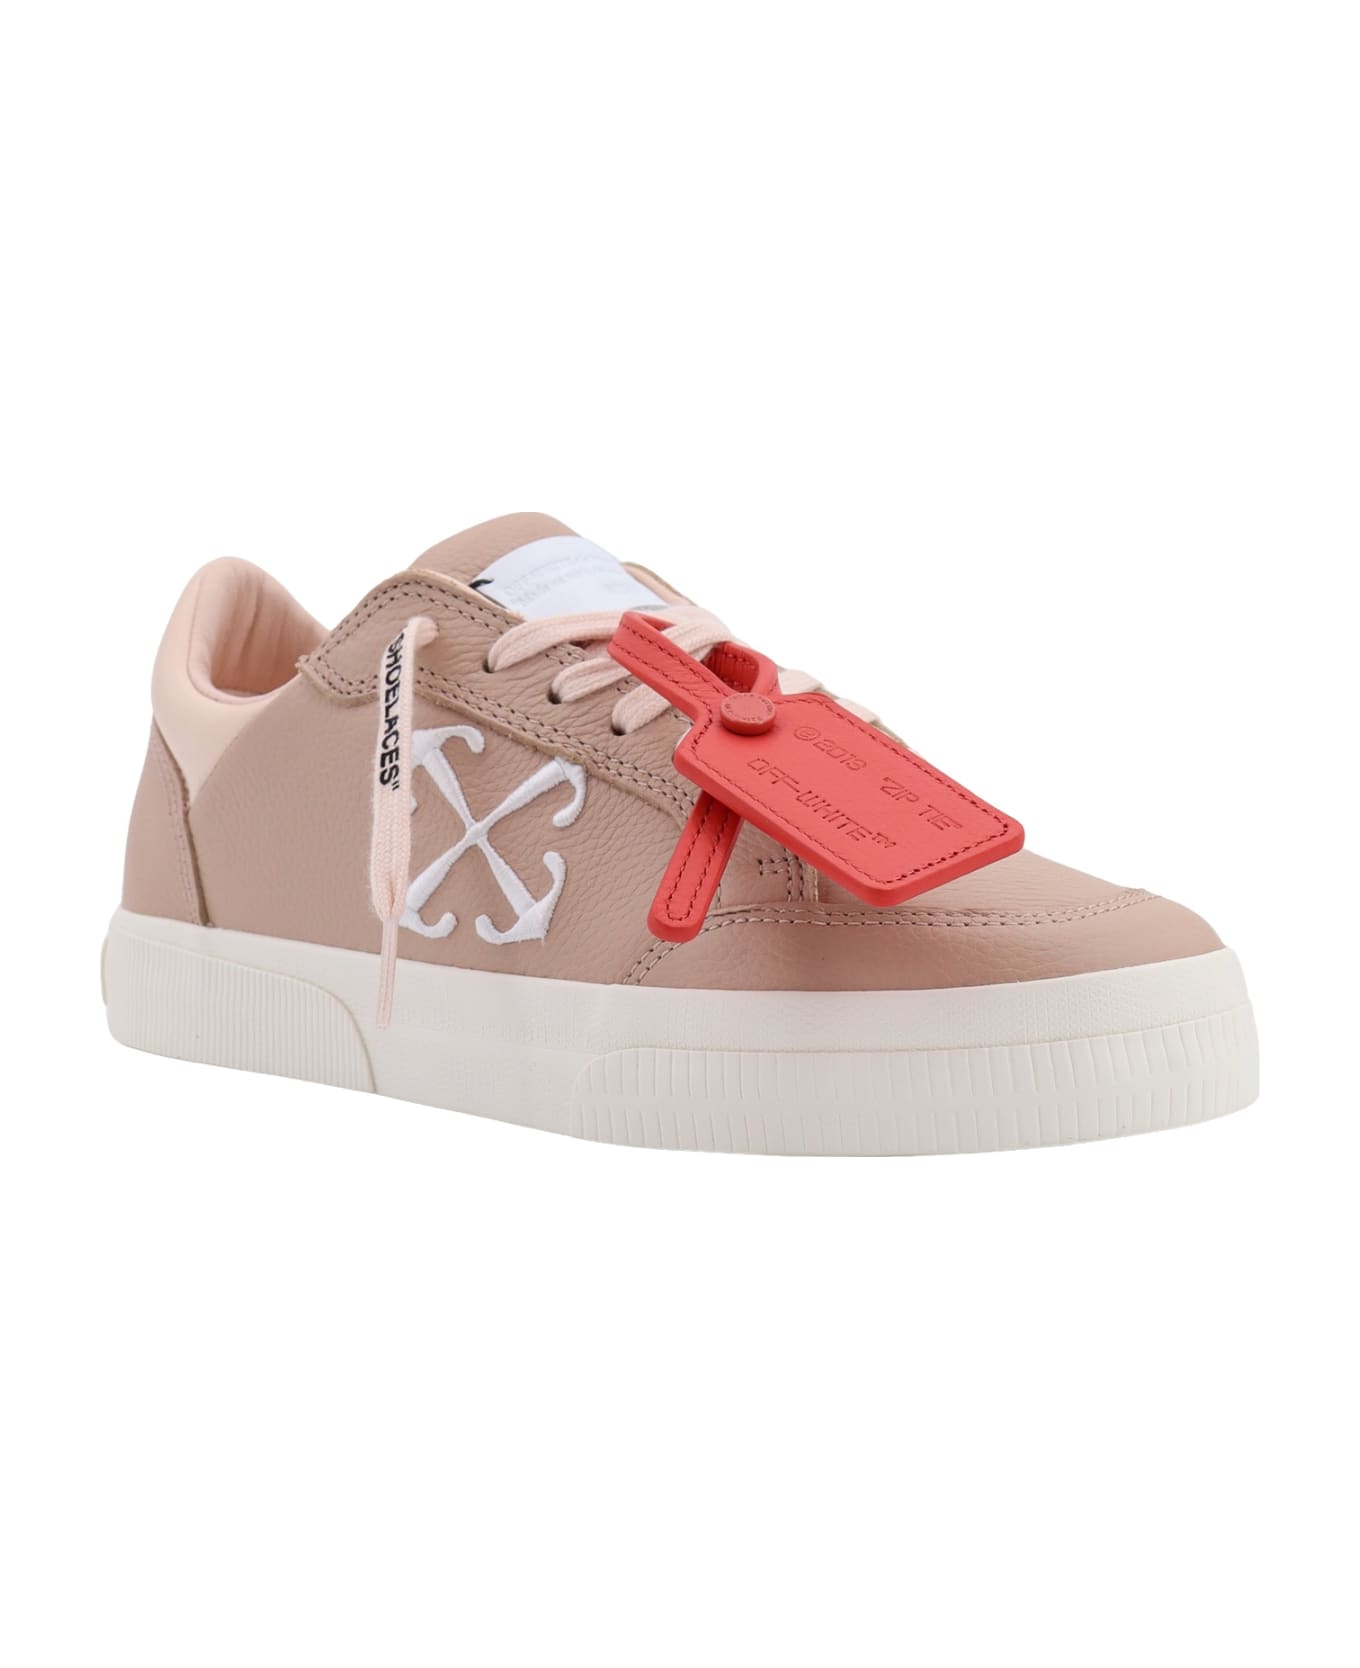 Off-White Vulcanized Sneakers - Pink スニーカー